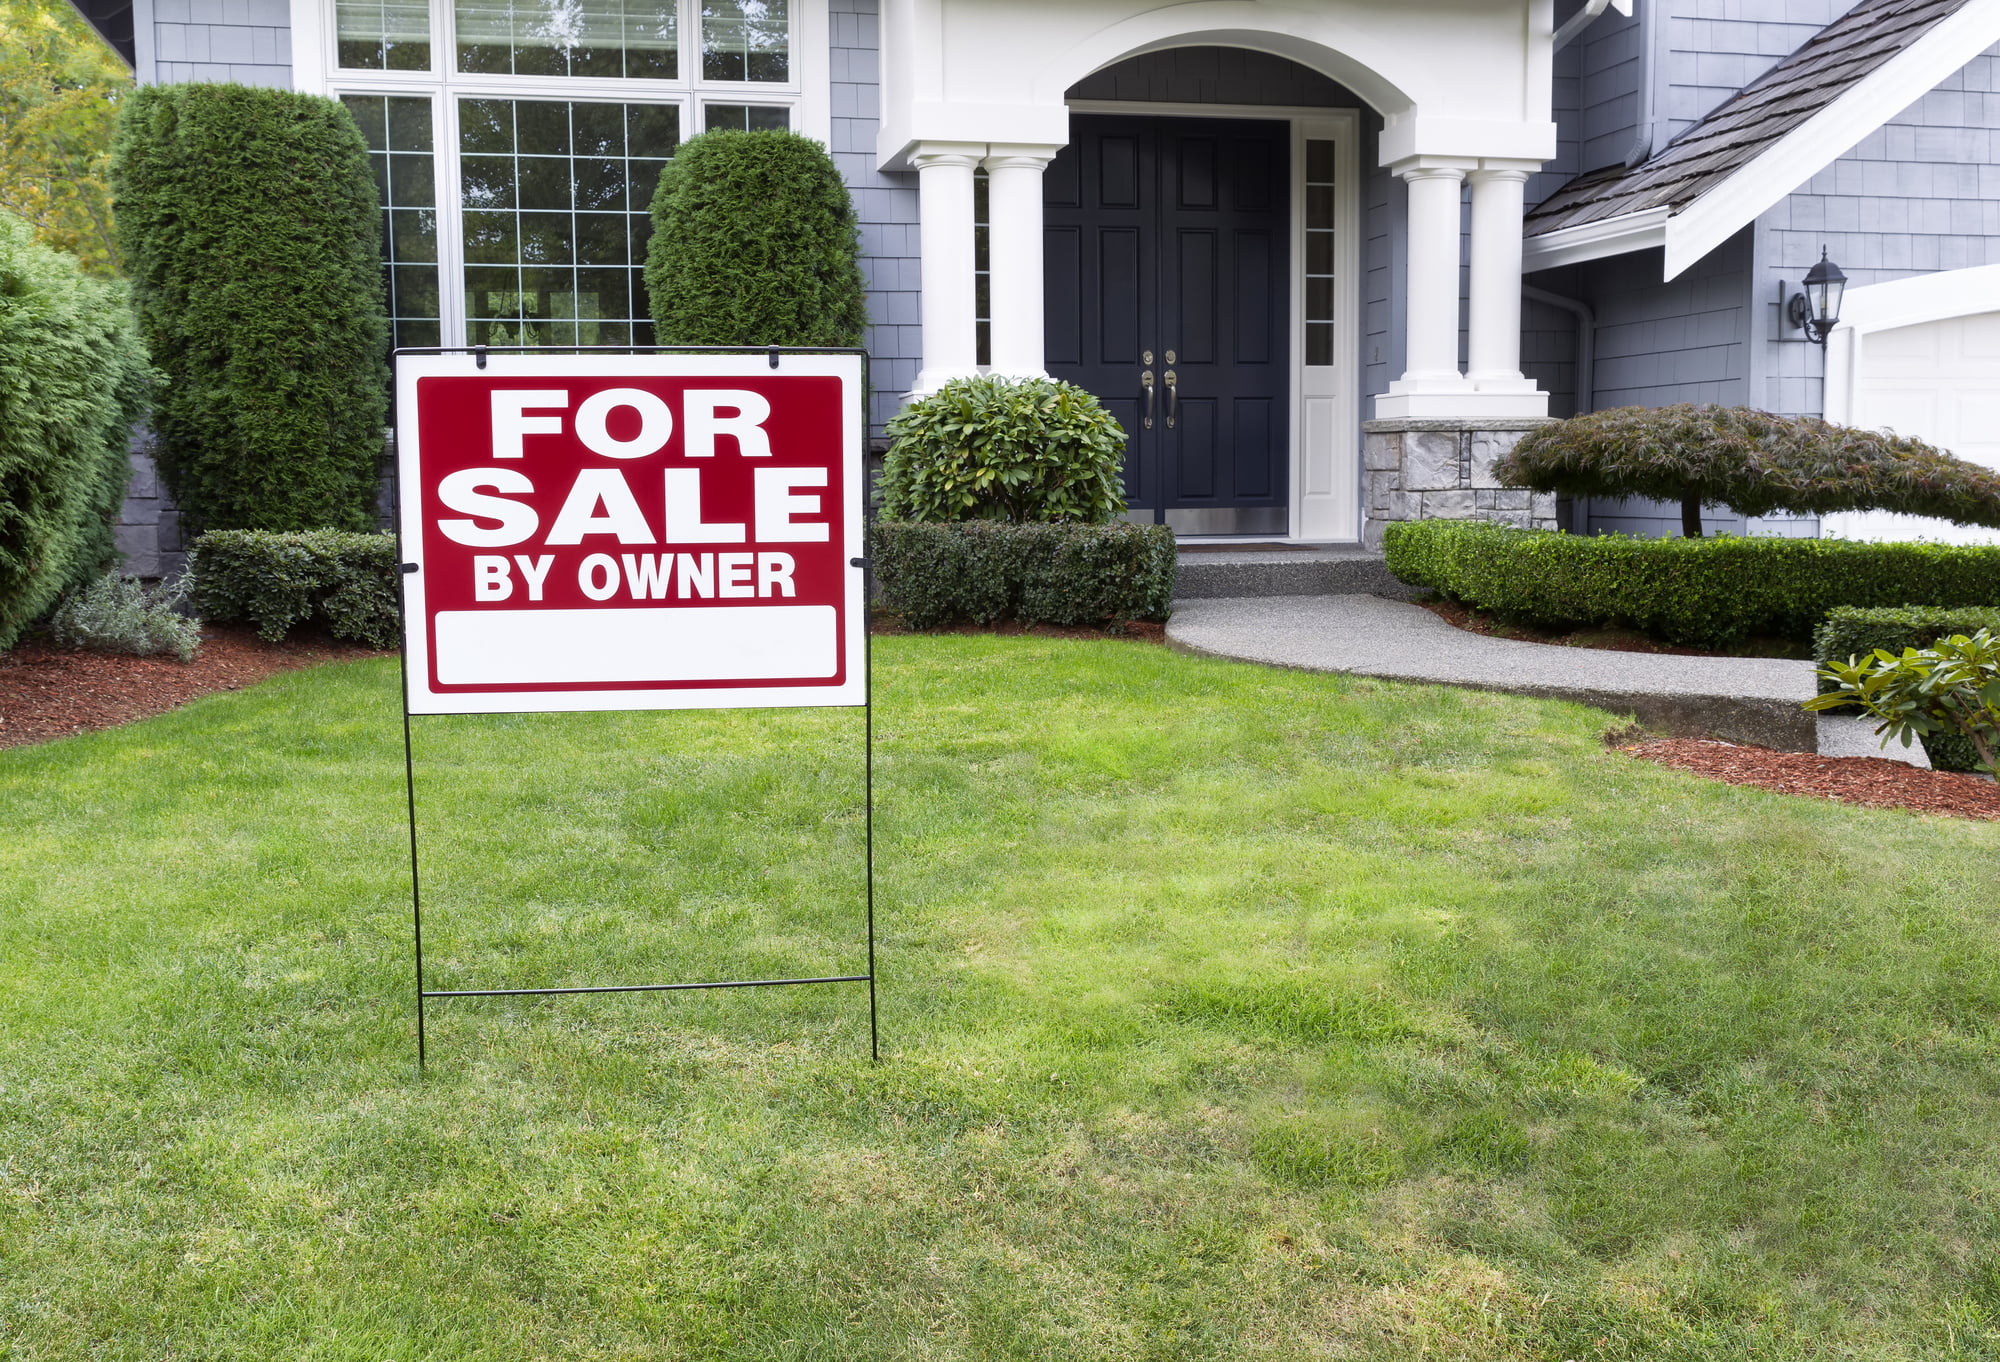 Selling your home is a huge decision, so it's important to make sure you are prepared. This is what you should consider before you sell your home.